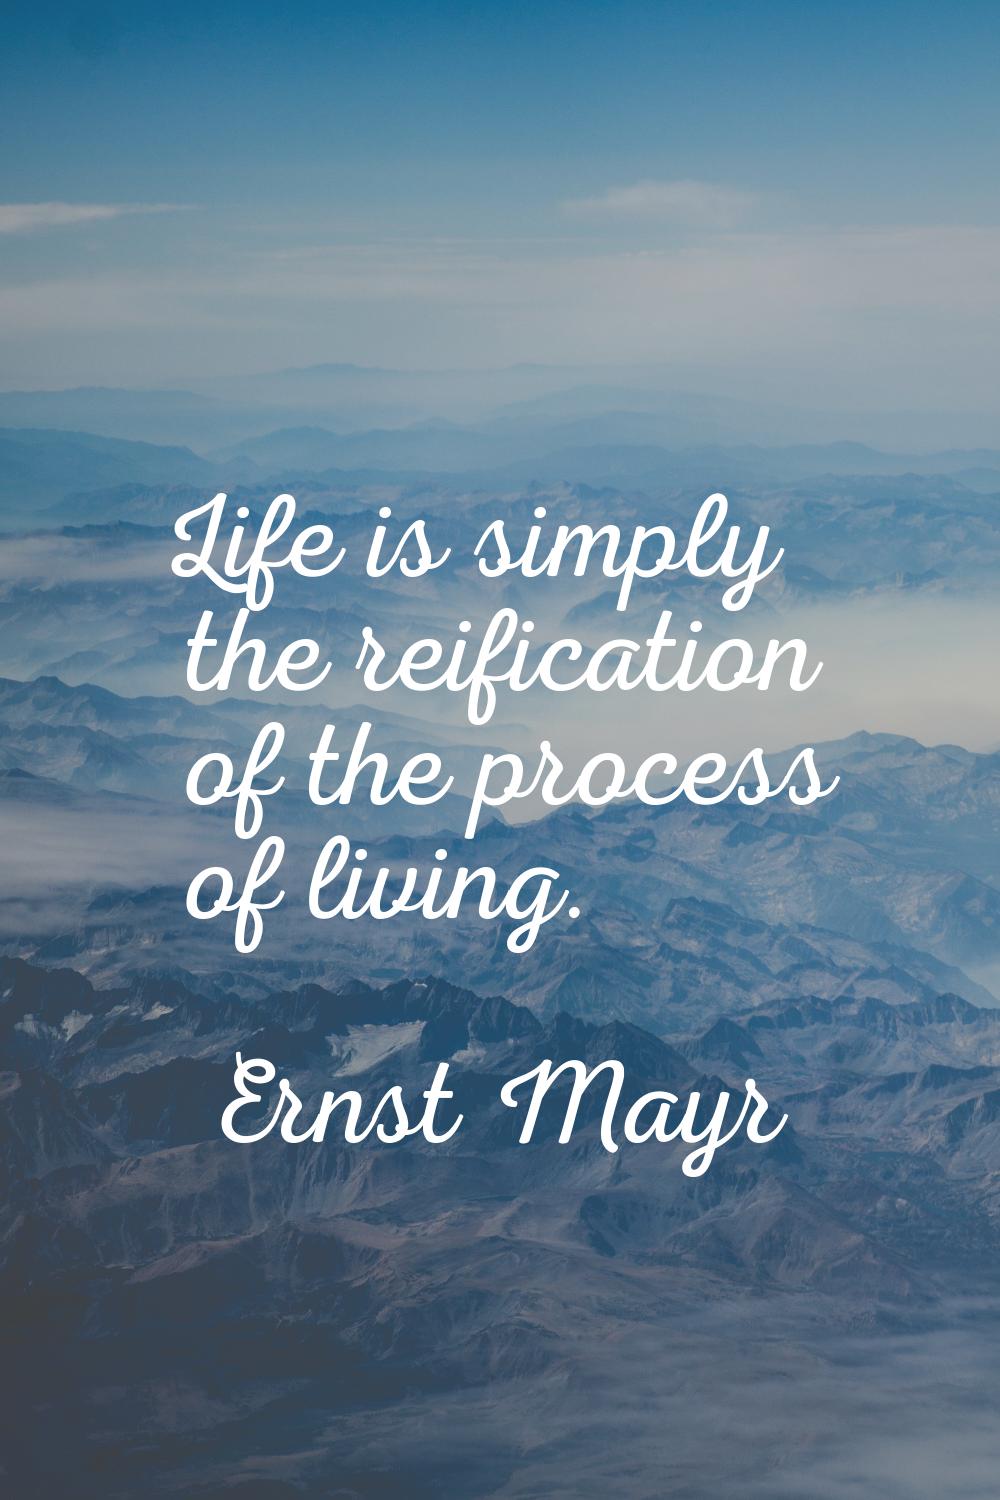 Life is simply the reification of the process of living.